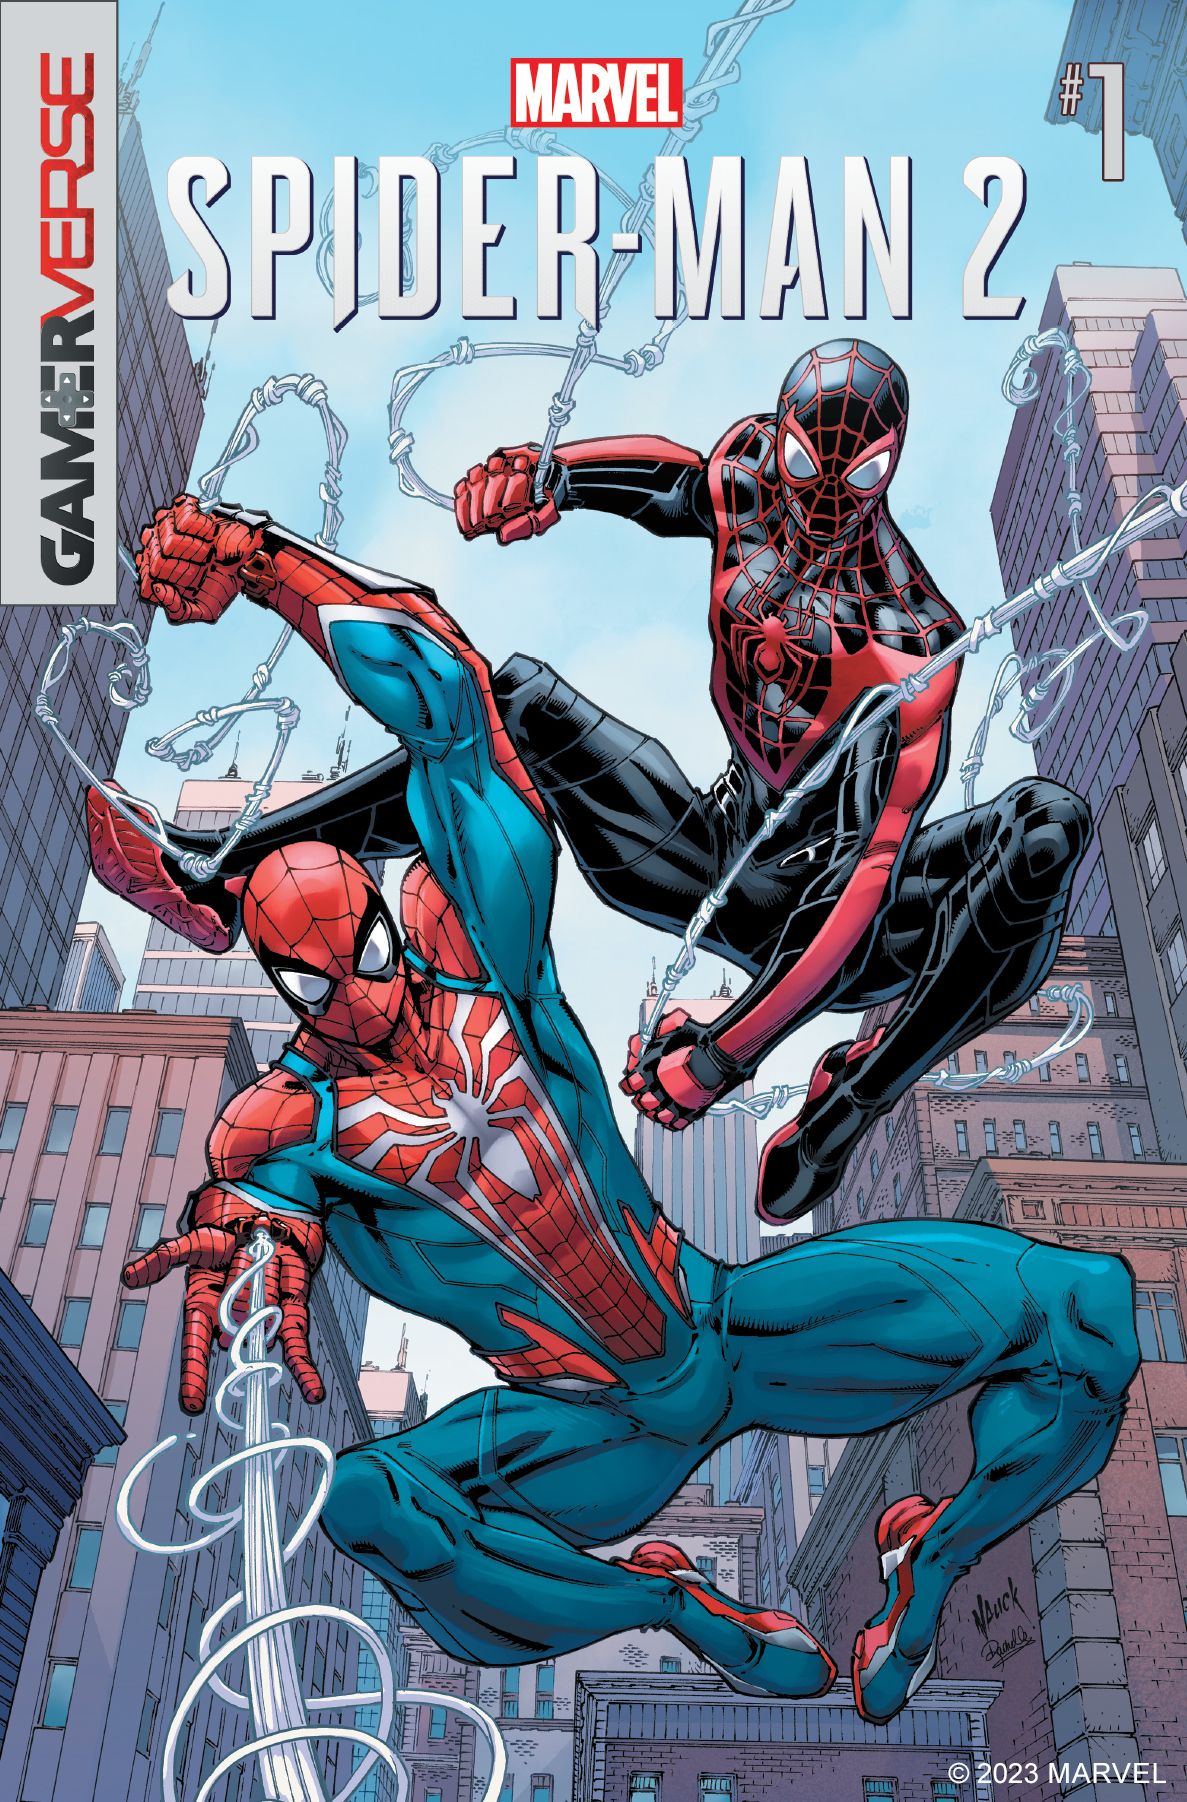 Spider-Man 2 comic showing Peter Parker and Miles Morales swinging through New York City